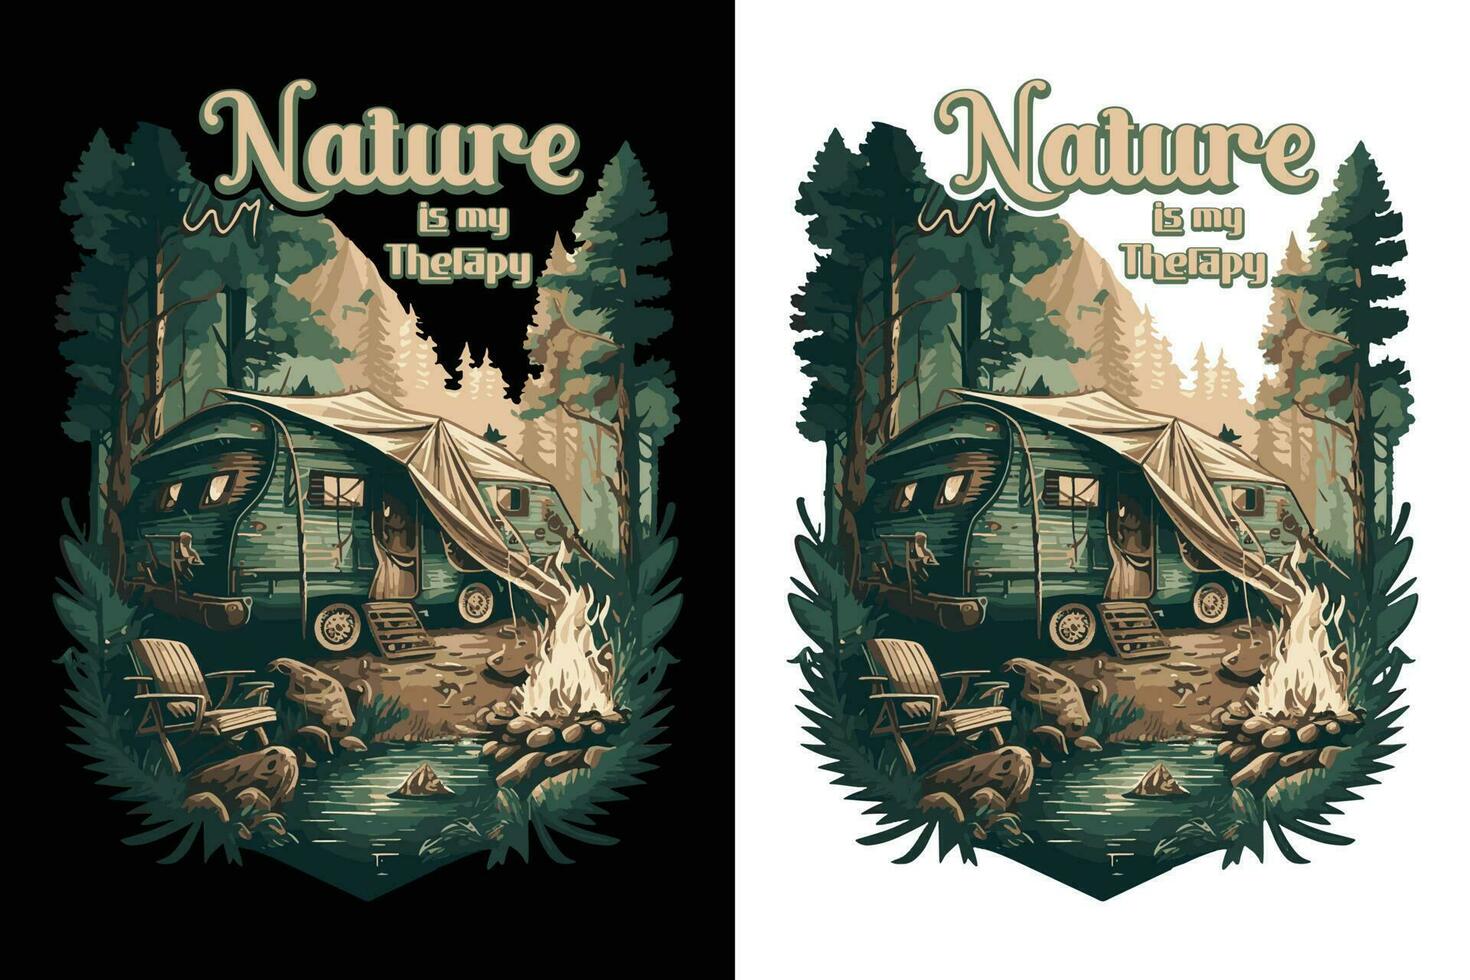 Camping t-shirt design, Travel T-shirt print, Adventure Mountain, sublimation print, design Outdoor, Tent camping in a forest near the mountains vector